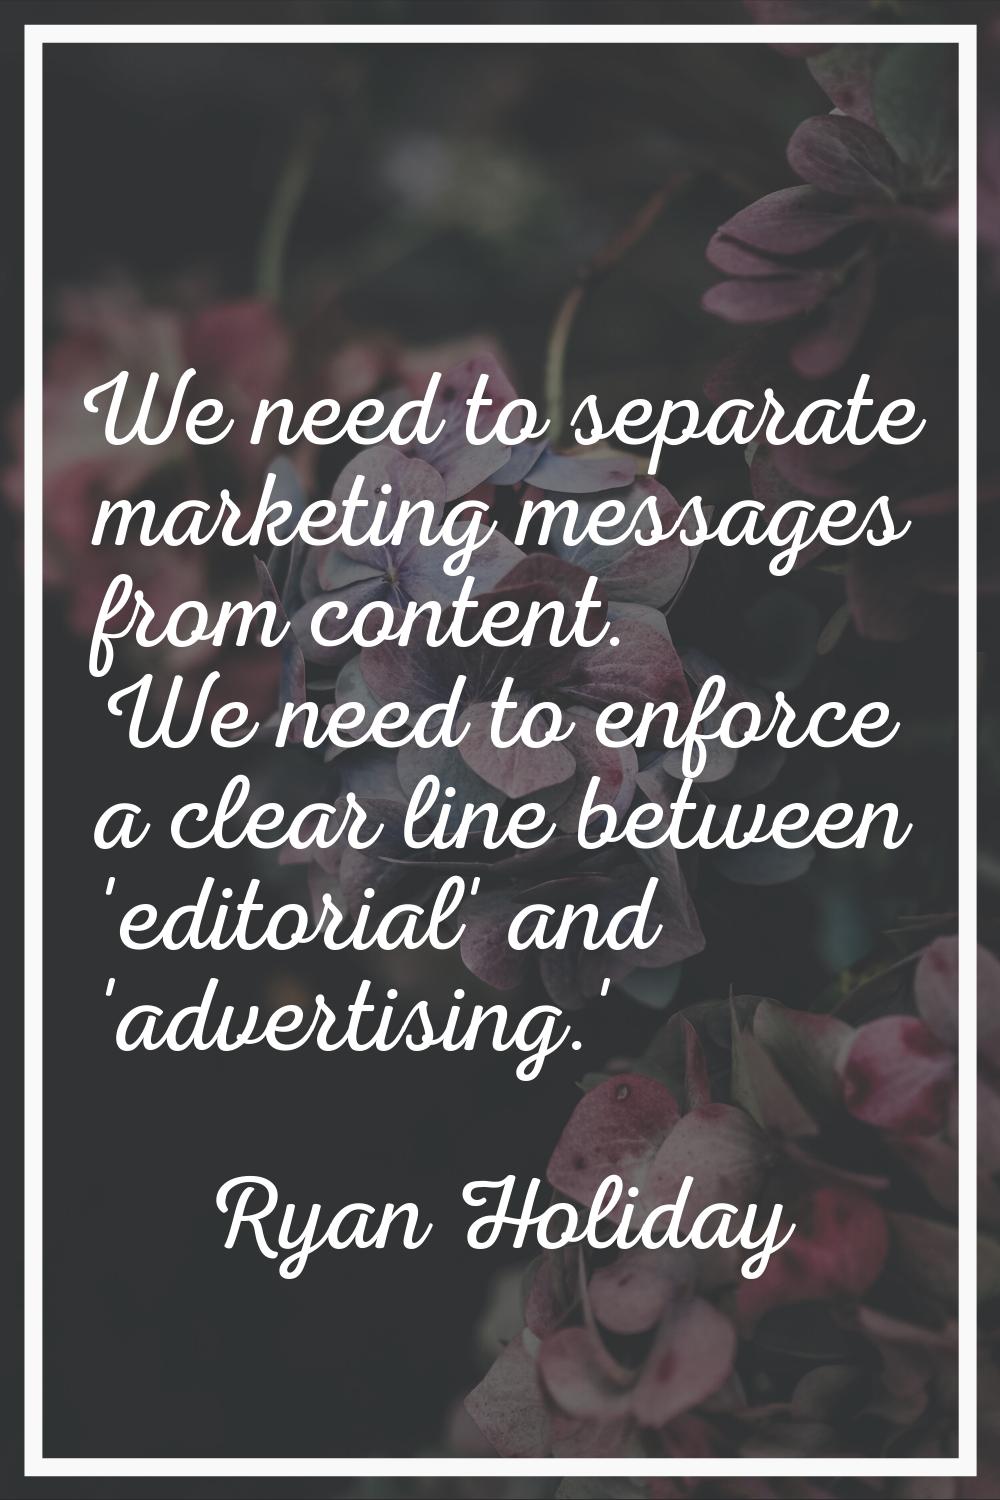 We need to separate marketing messages from content. We need to enforce a clear line between 'edito